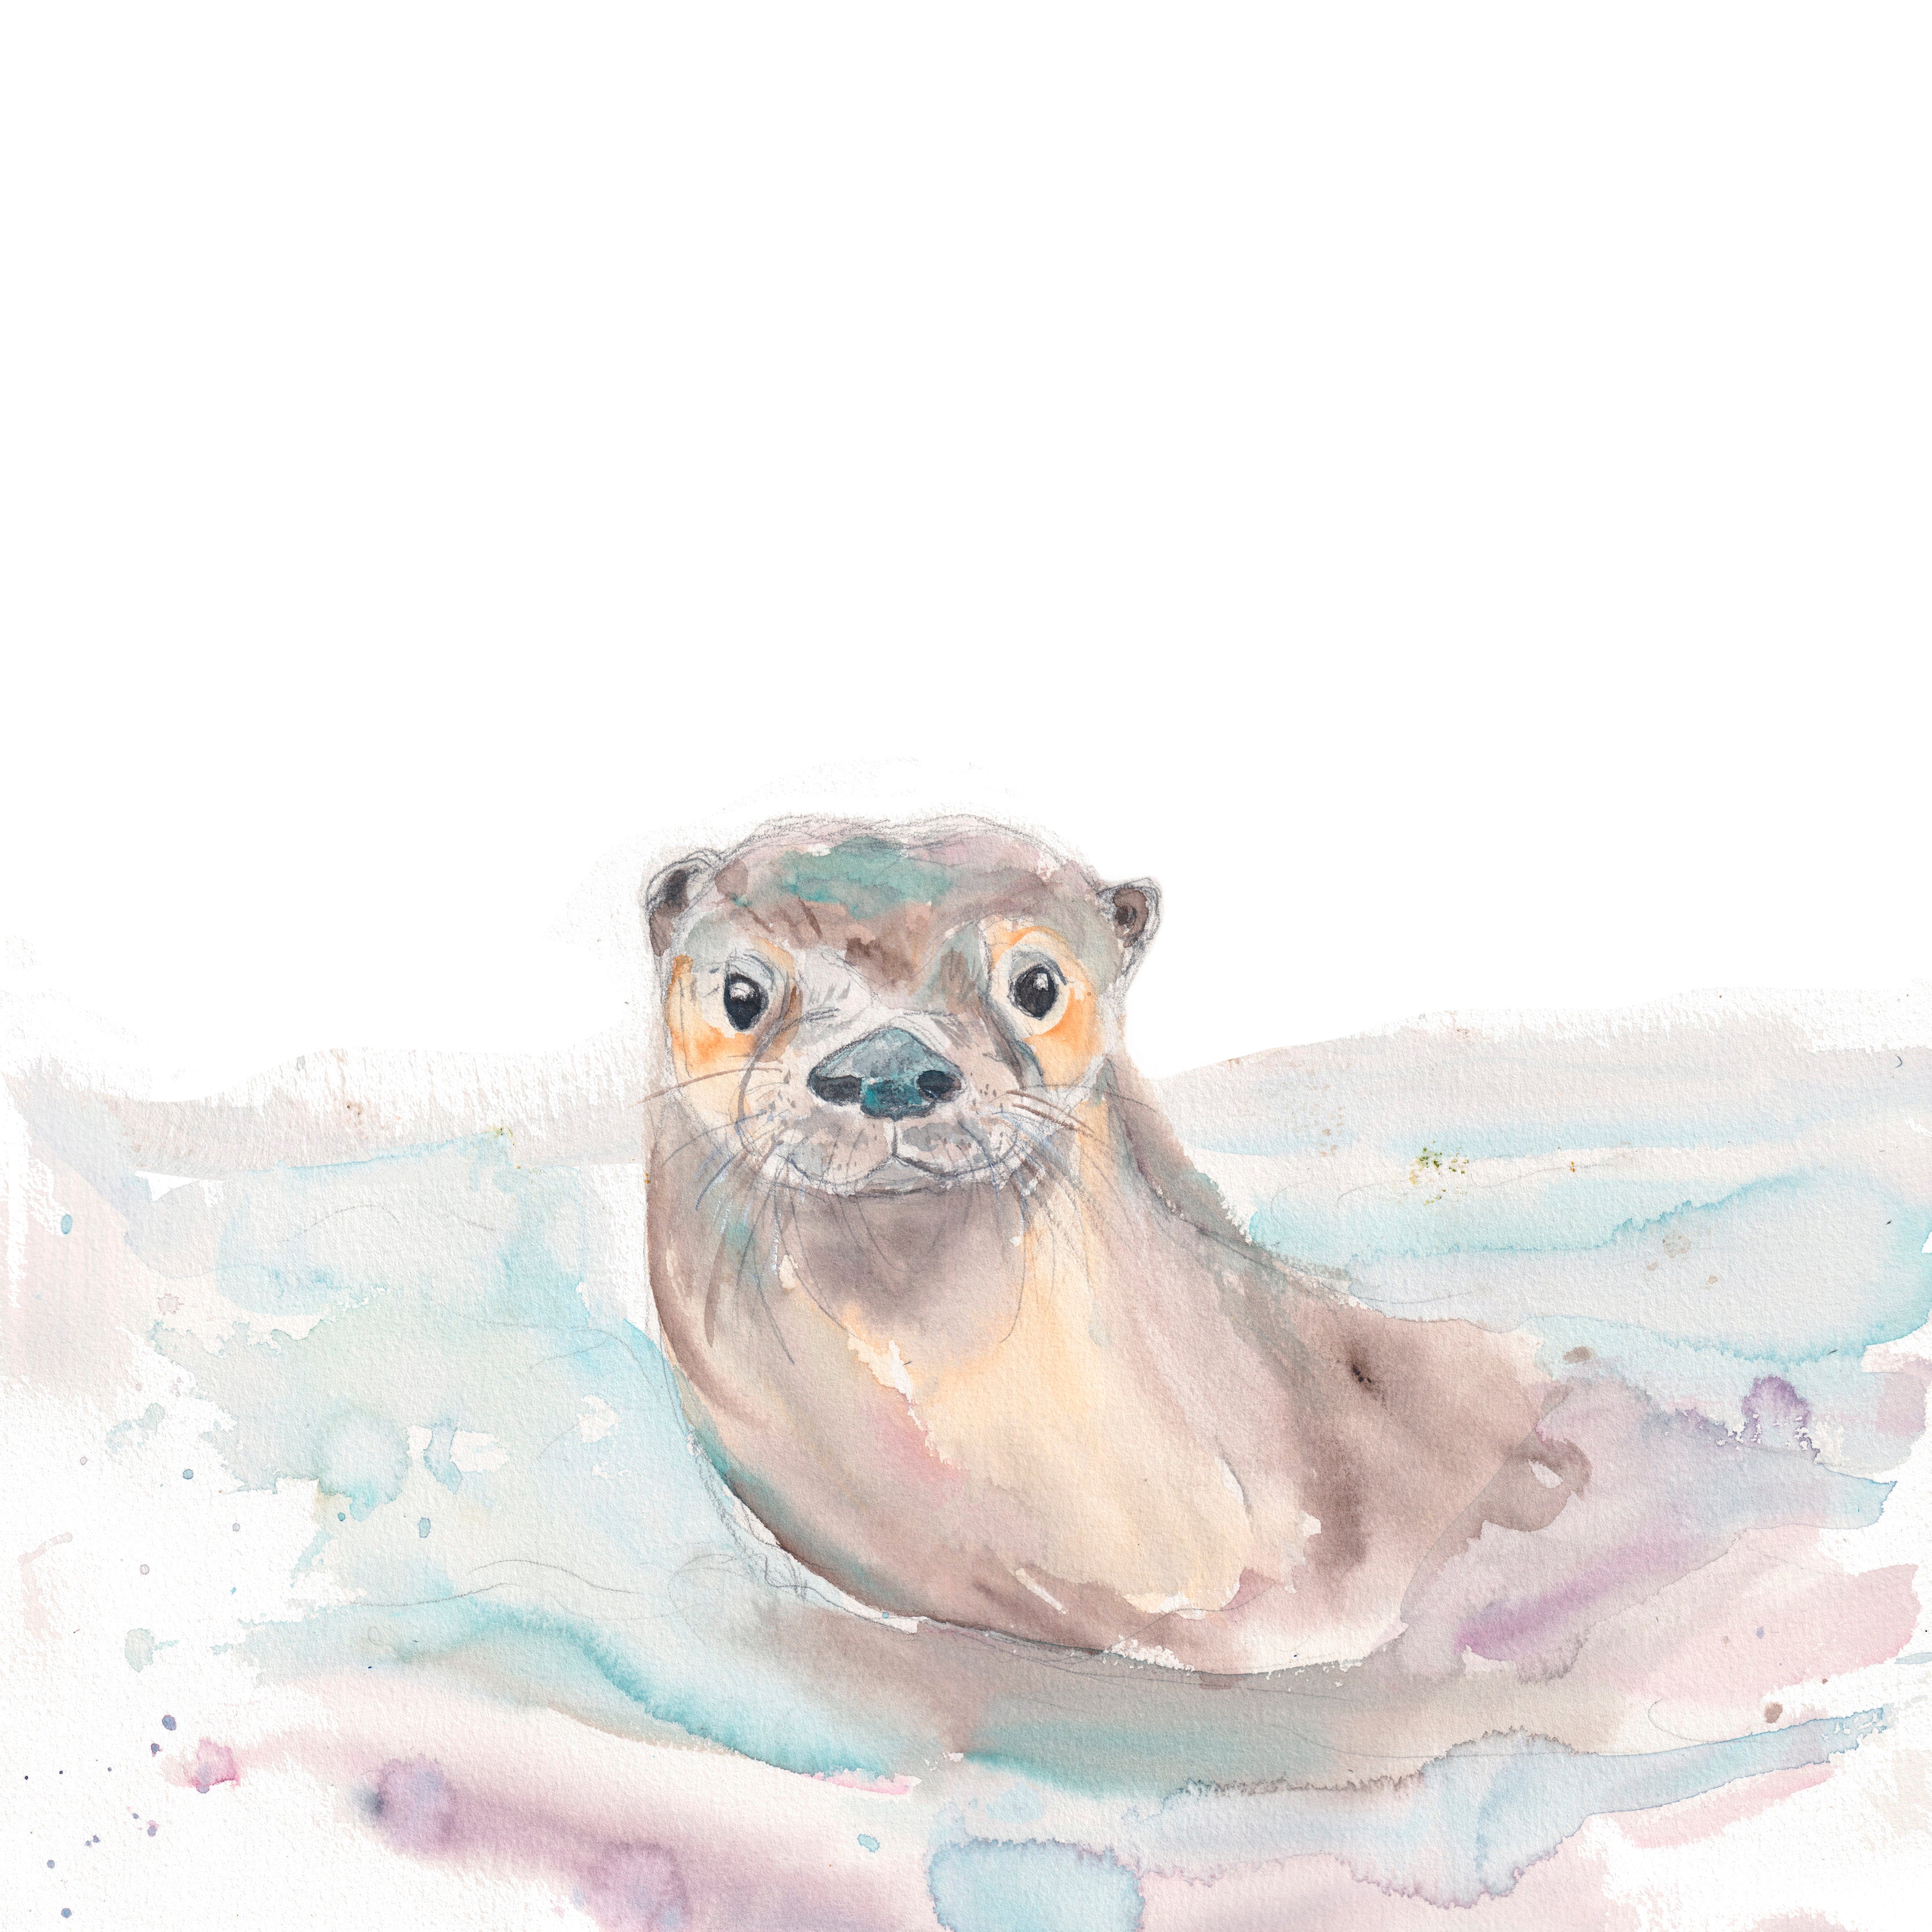 OTTER ART PRINT, "Are you coming?" Watercolor Animal, Minimalist, made in Québec by Sophie Dufresne Guindon